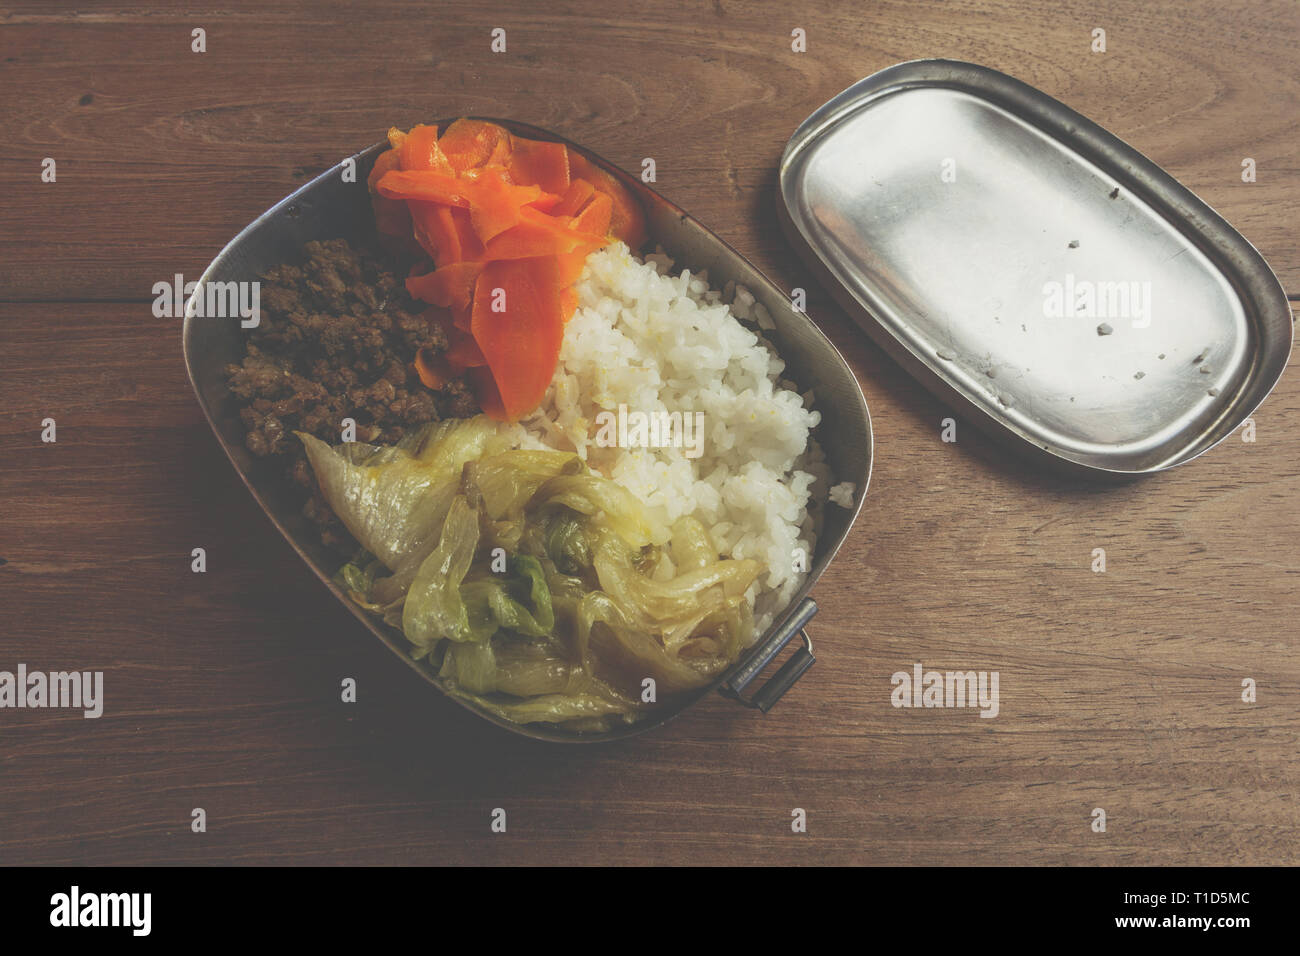 Ground beef, carrot, cabbage lettuce (iceberg lettuce), rice, food ready to eat, in stainless steel bento lunch box Stock Photo